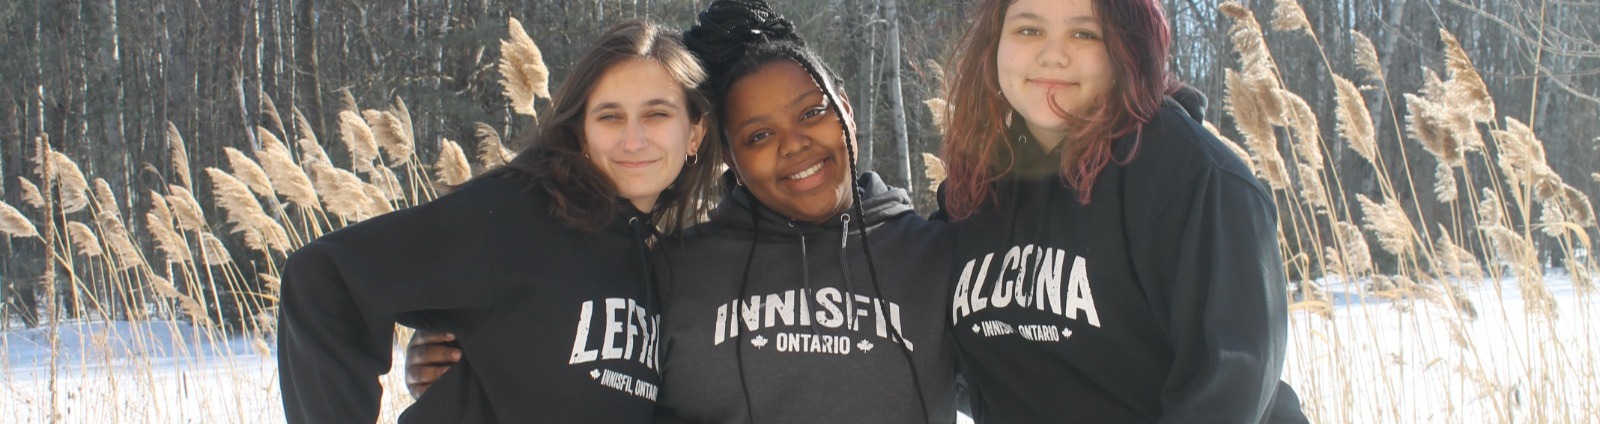 Group of three teen girls wearing hoodies and smiling